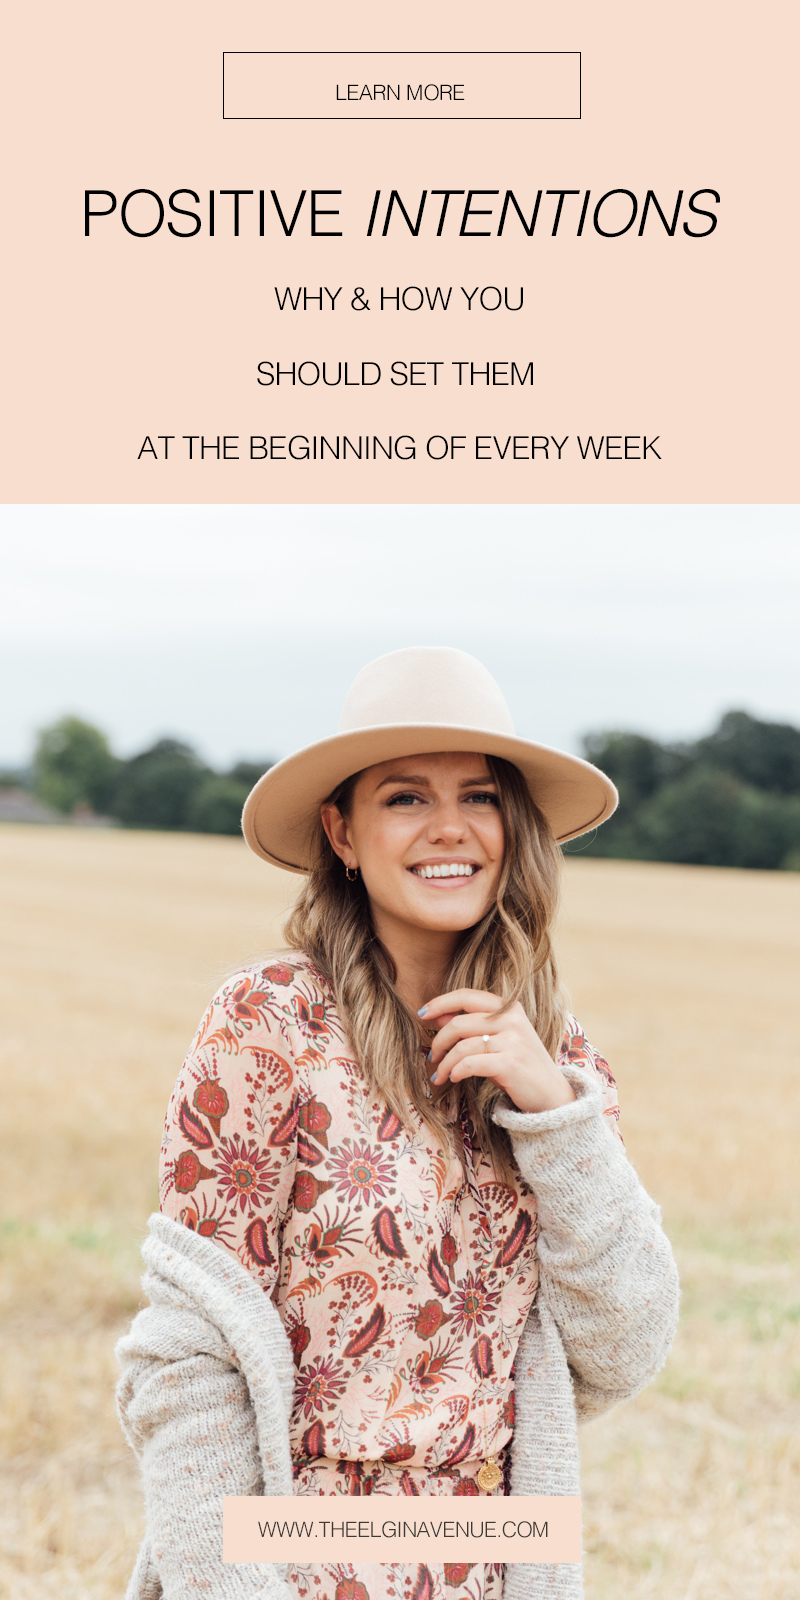 How and Why To Set Positive Intentions at the Beginning of Every Week | The Elgin Avenue